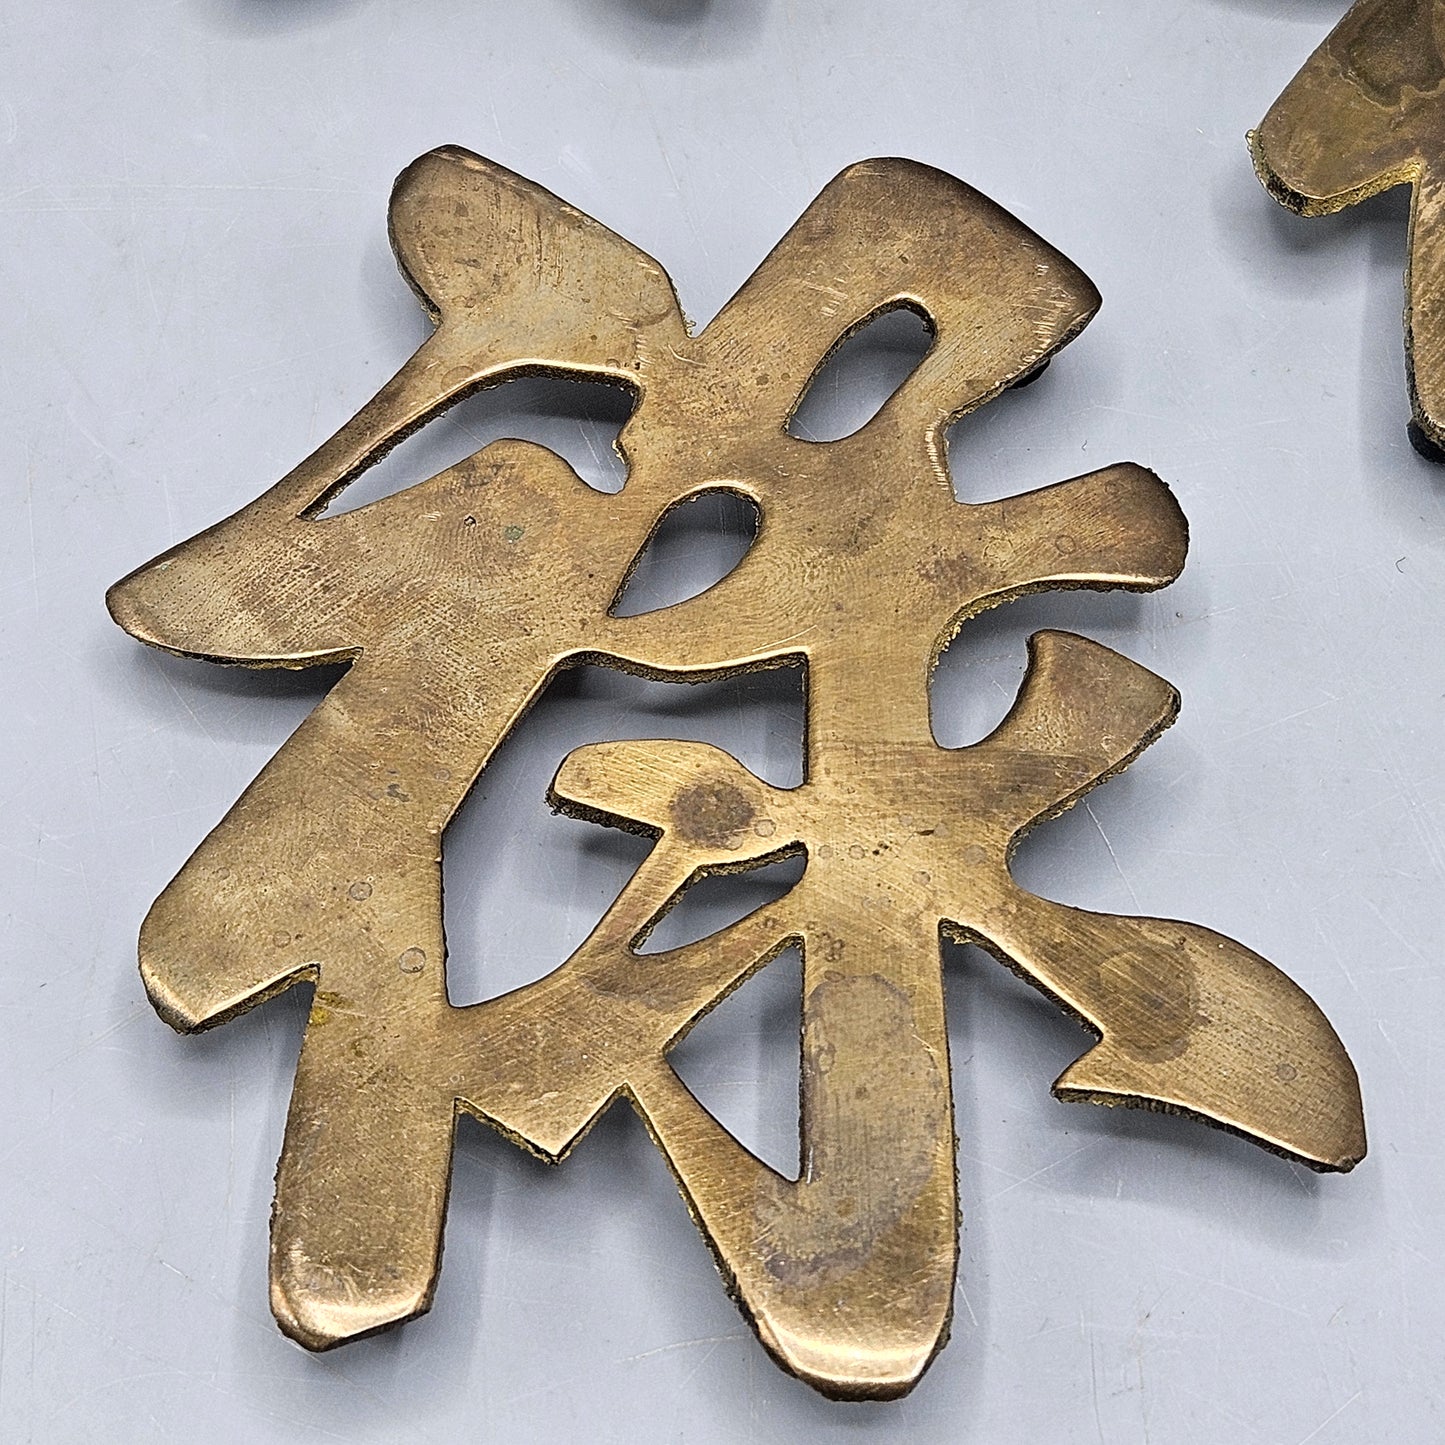 Set of 3 Vintage Brass Trivet Wall Hangings Shaped Like Chinese Symbols for Good Fortune & Prosperity